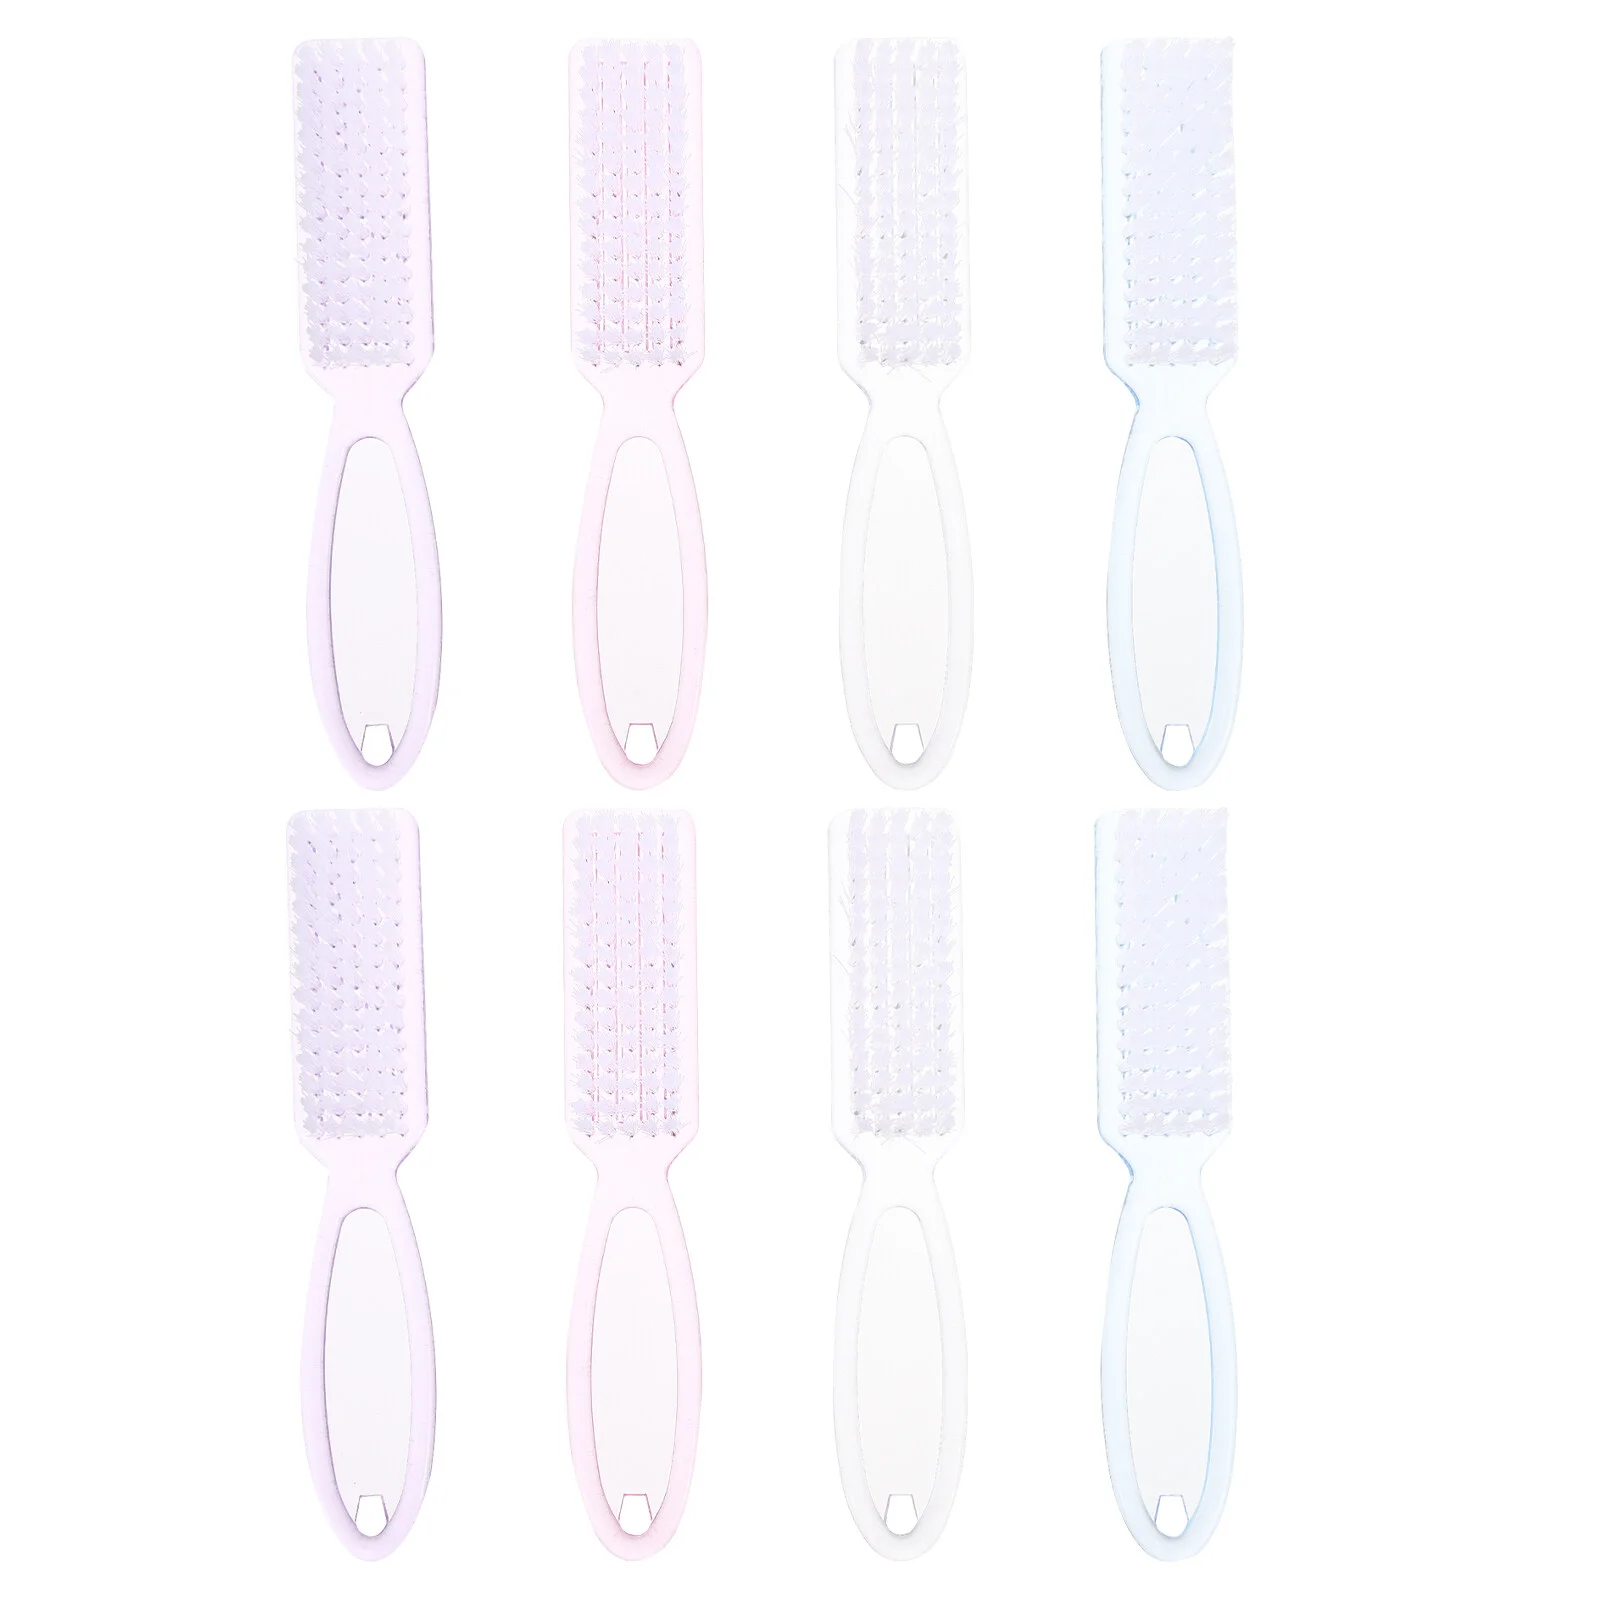 

8 Pcs Nail Cleaning Brush Cleaner Brushes Dust Care Fingernail Scrubber Pp Household Manicure